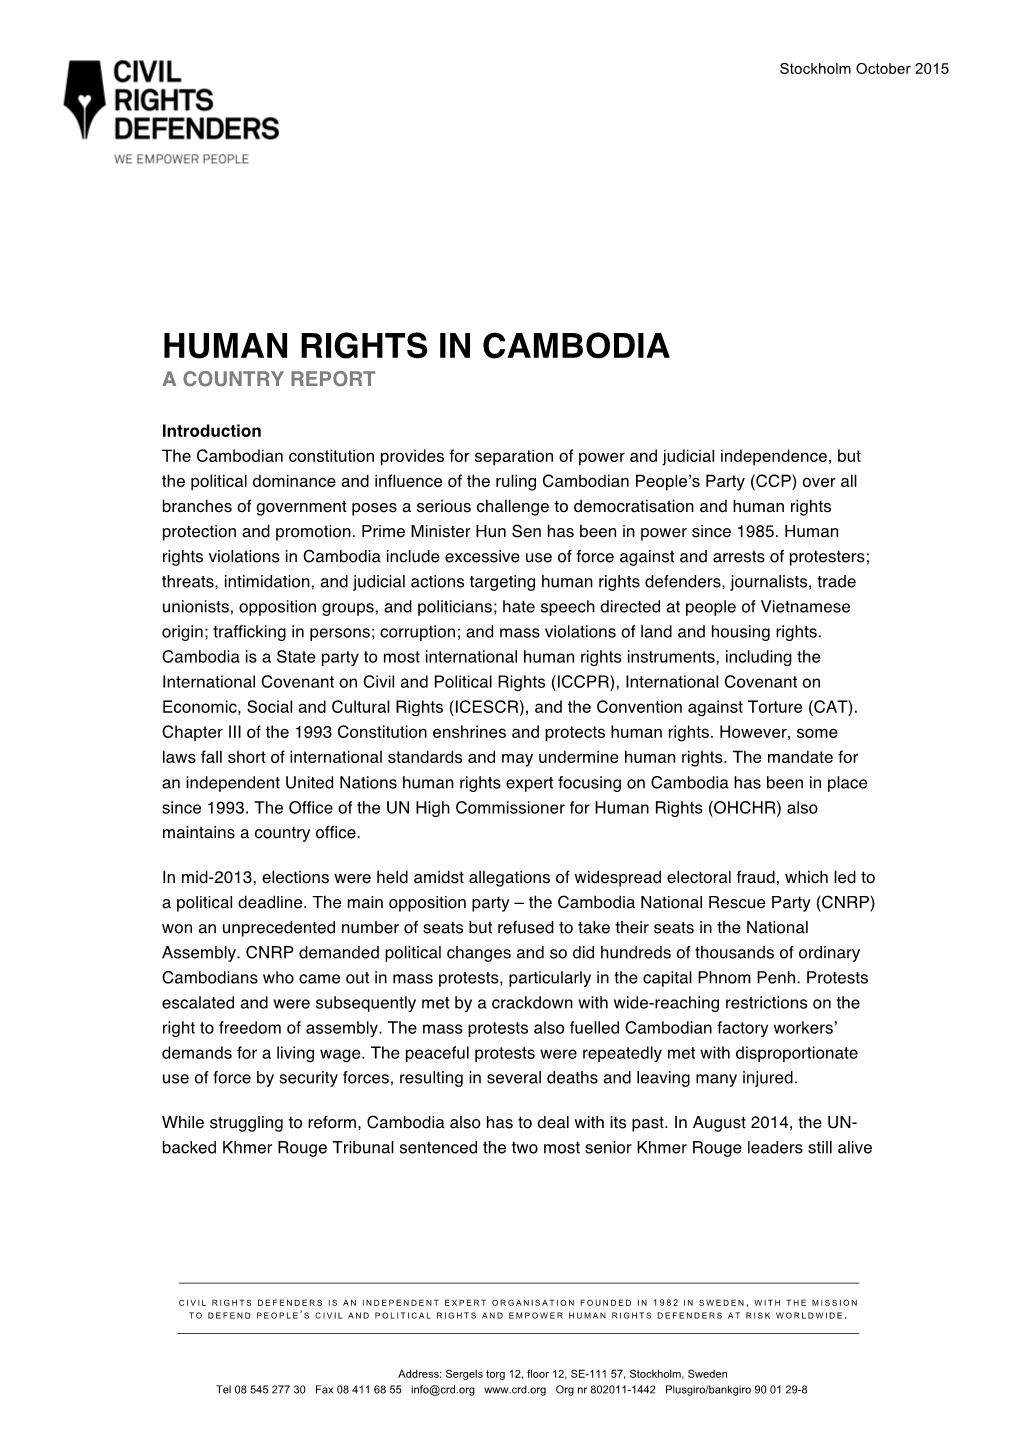 Human Rights in Cambodia a Country Report